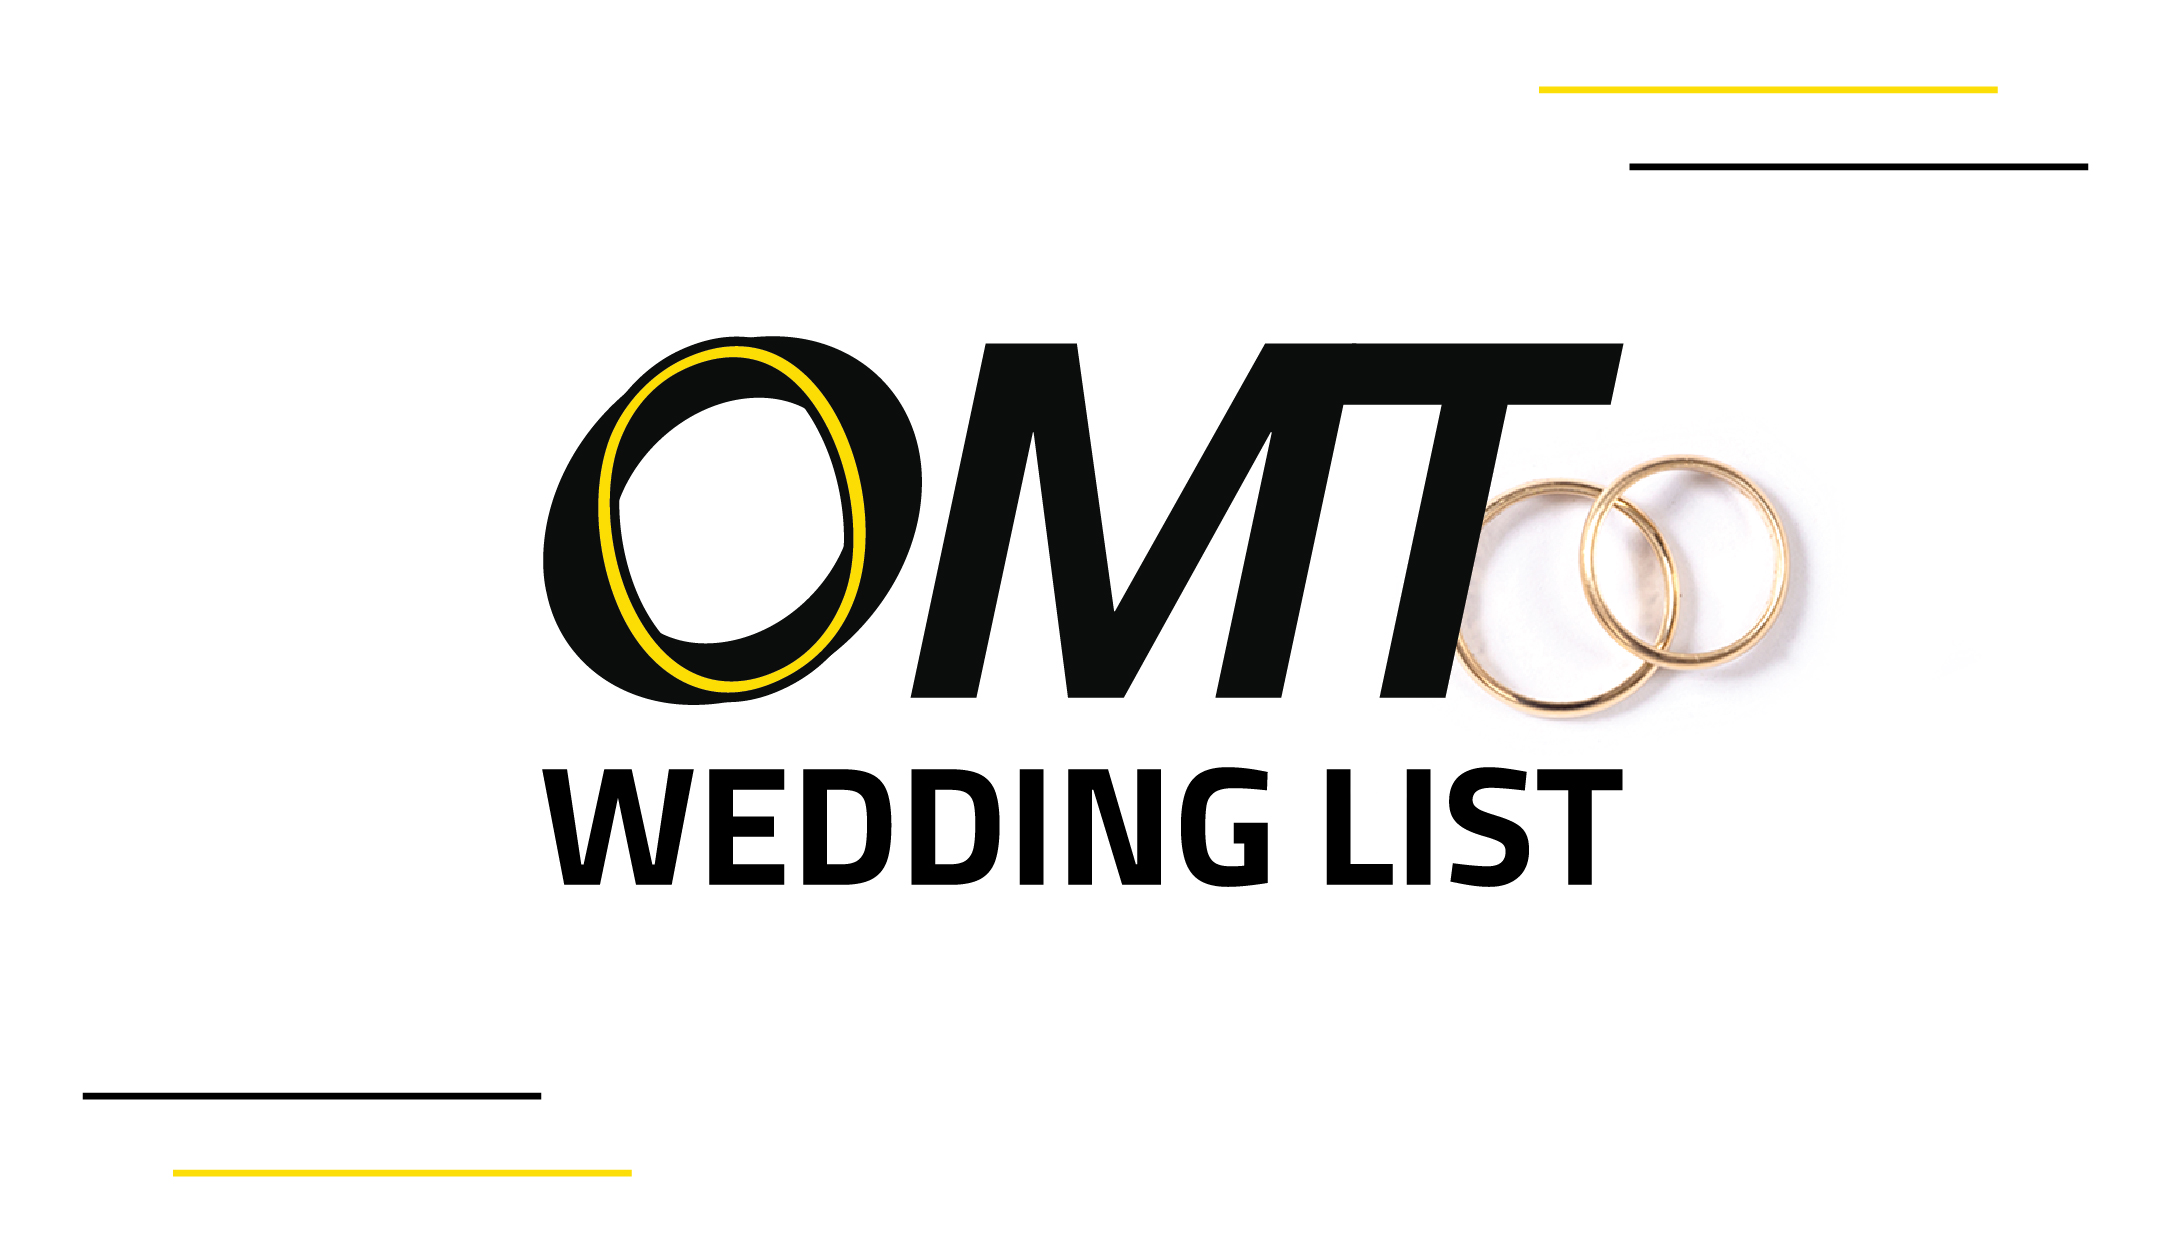 Your Wedding List now at OMT!